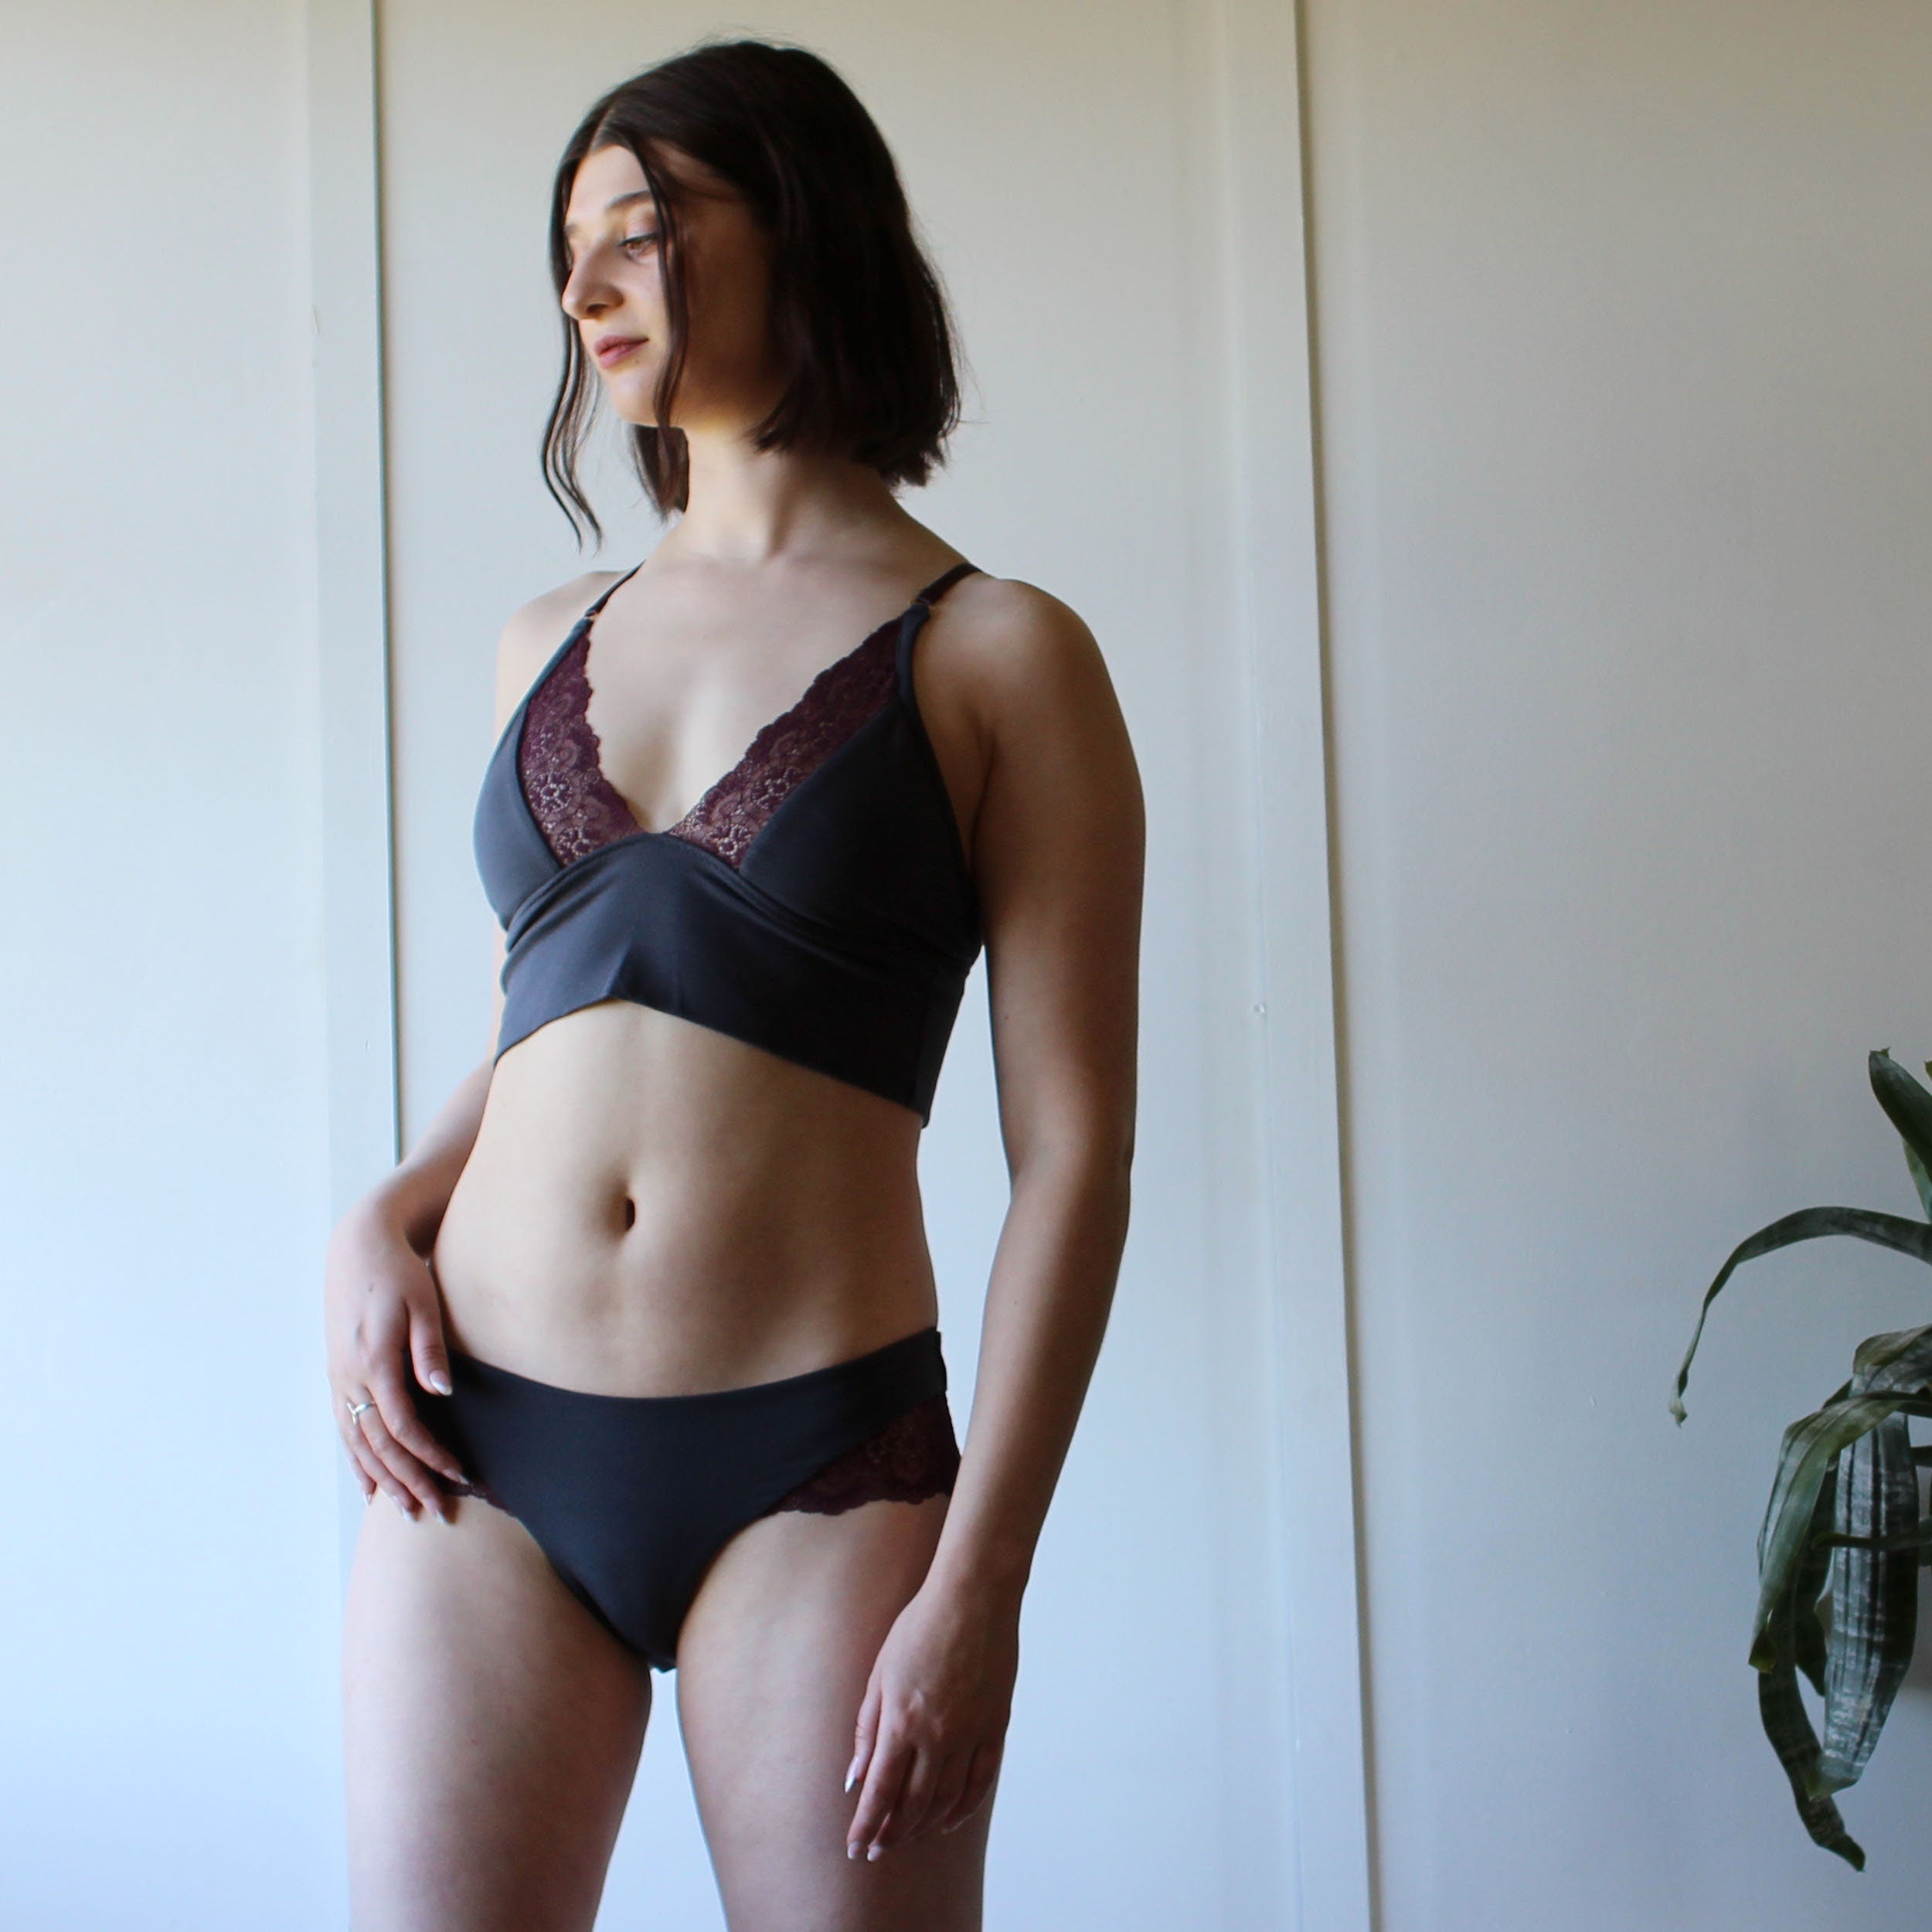 Organic Cotton Underwear Set, 2 Piece Set including Lace Trimmed Bralette and Panties, Made to Order, Made in the USA